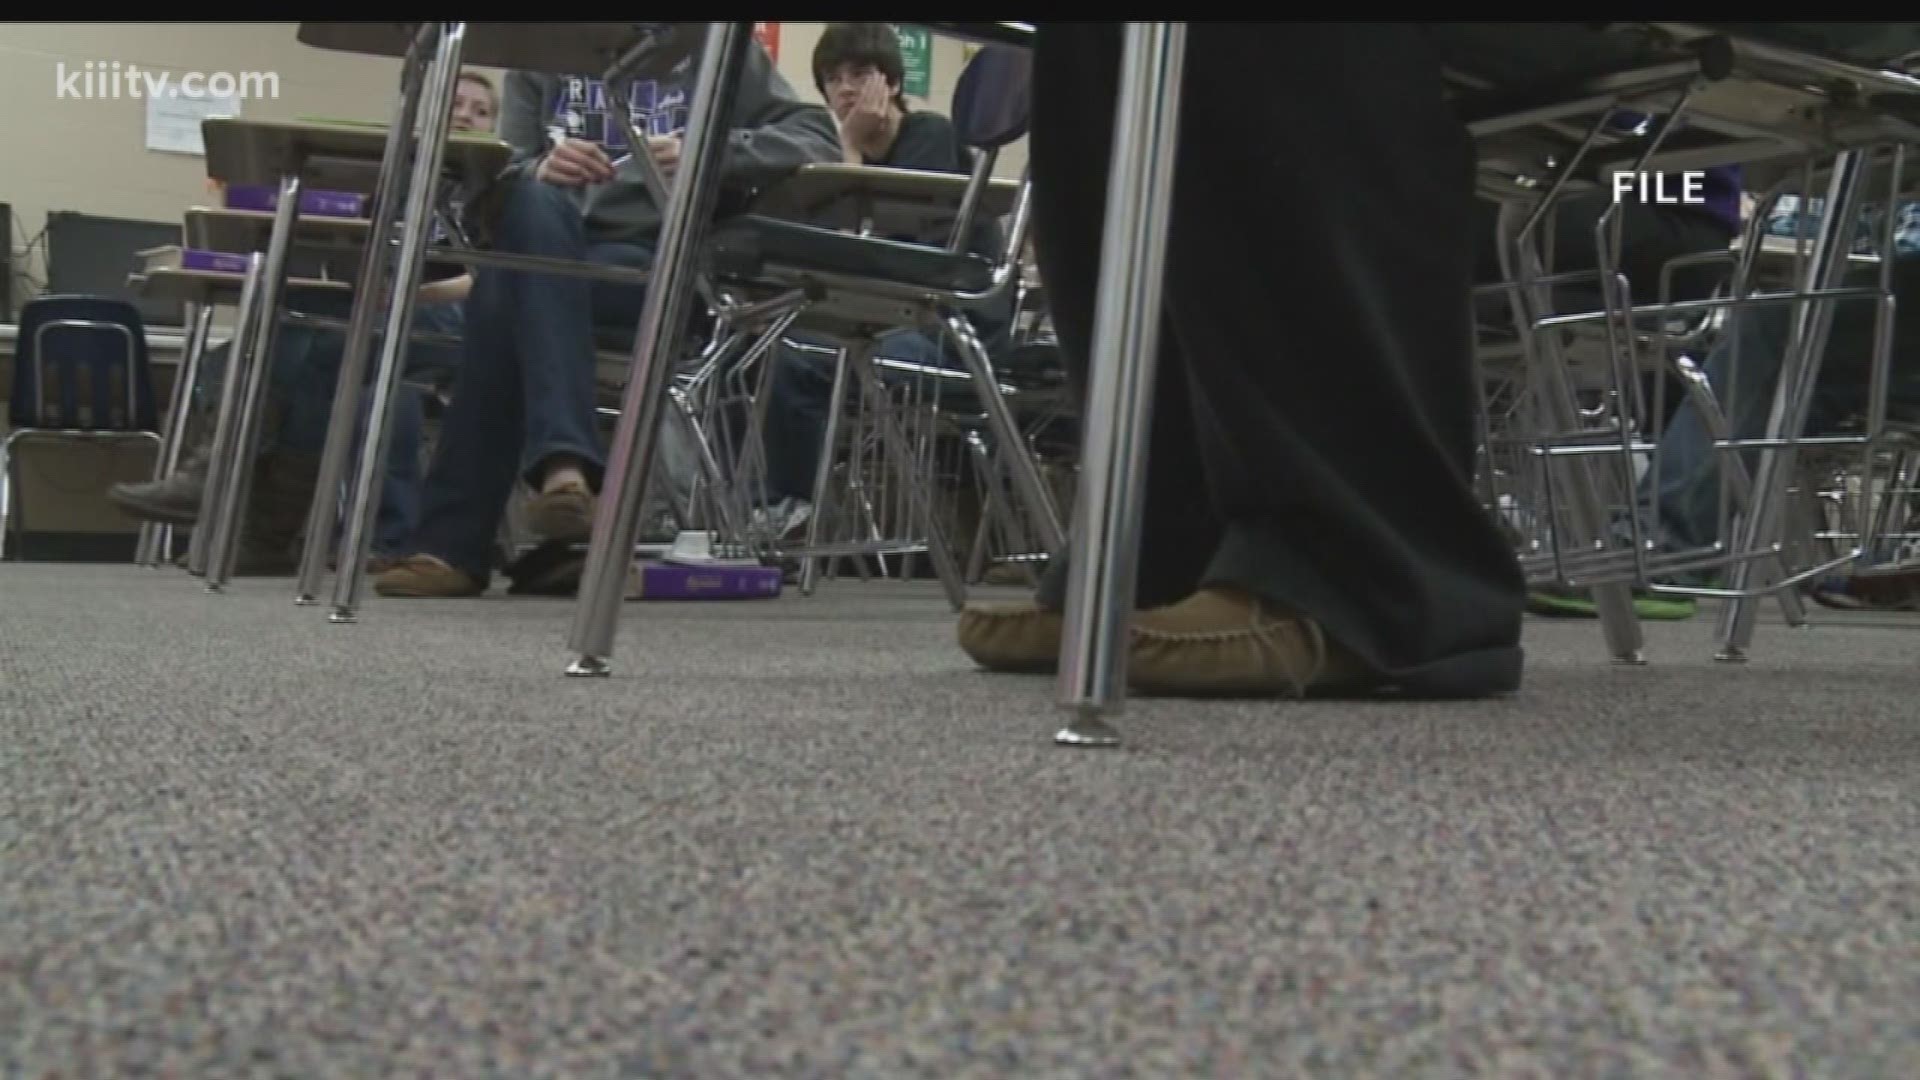 With school starting in less than two weeks for some students, districts across the state have received the 2018 Accountability Ratings from the Texas Education Agency.